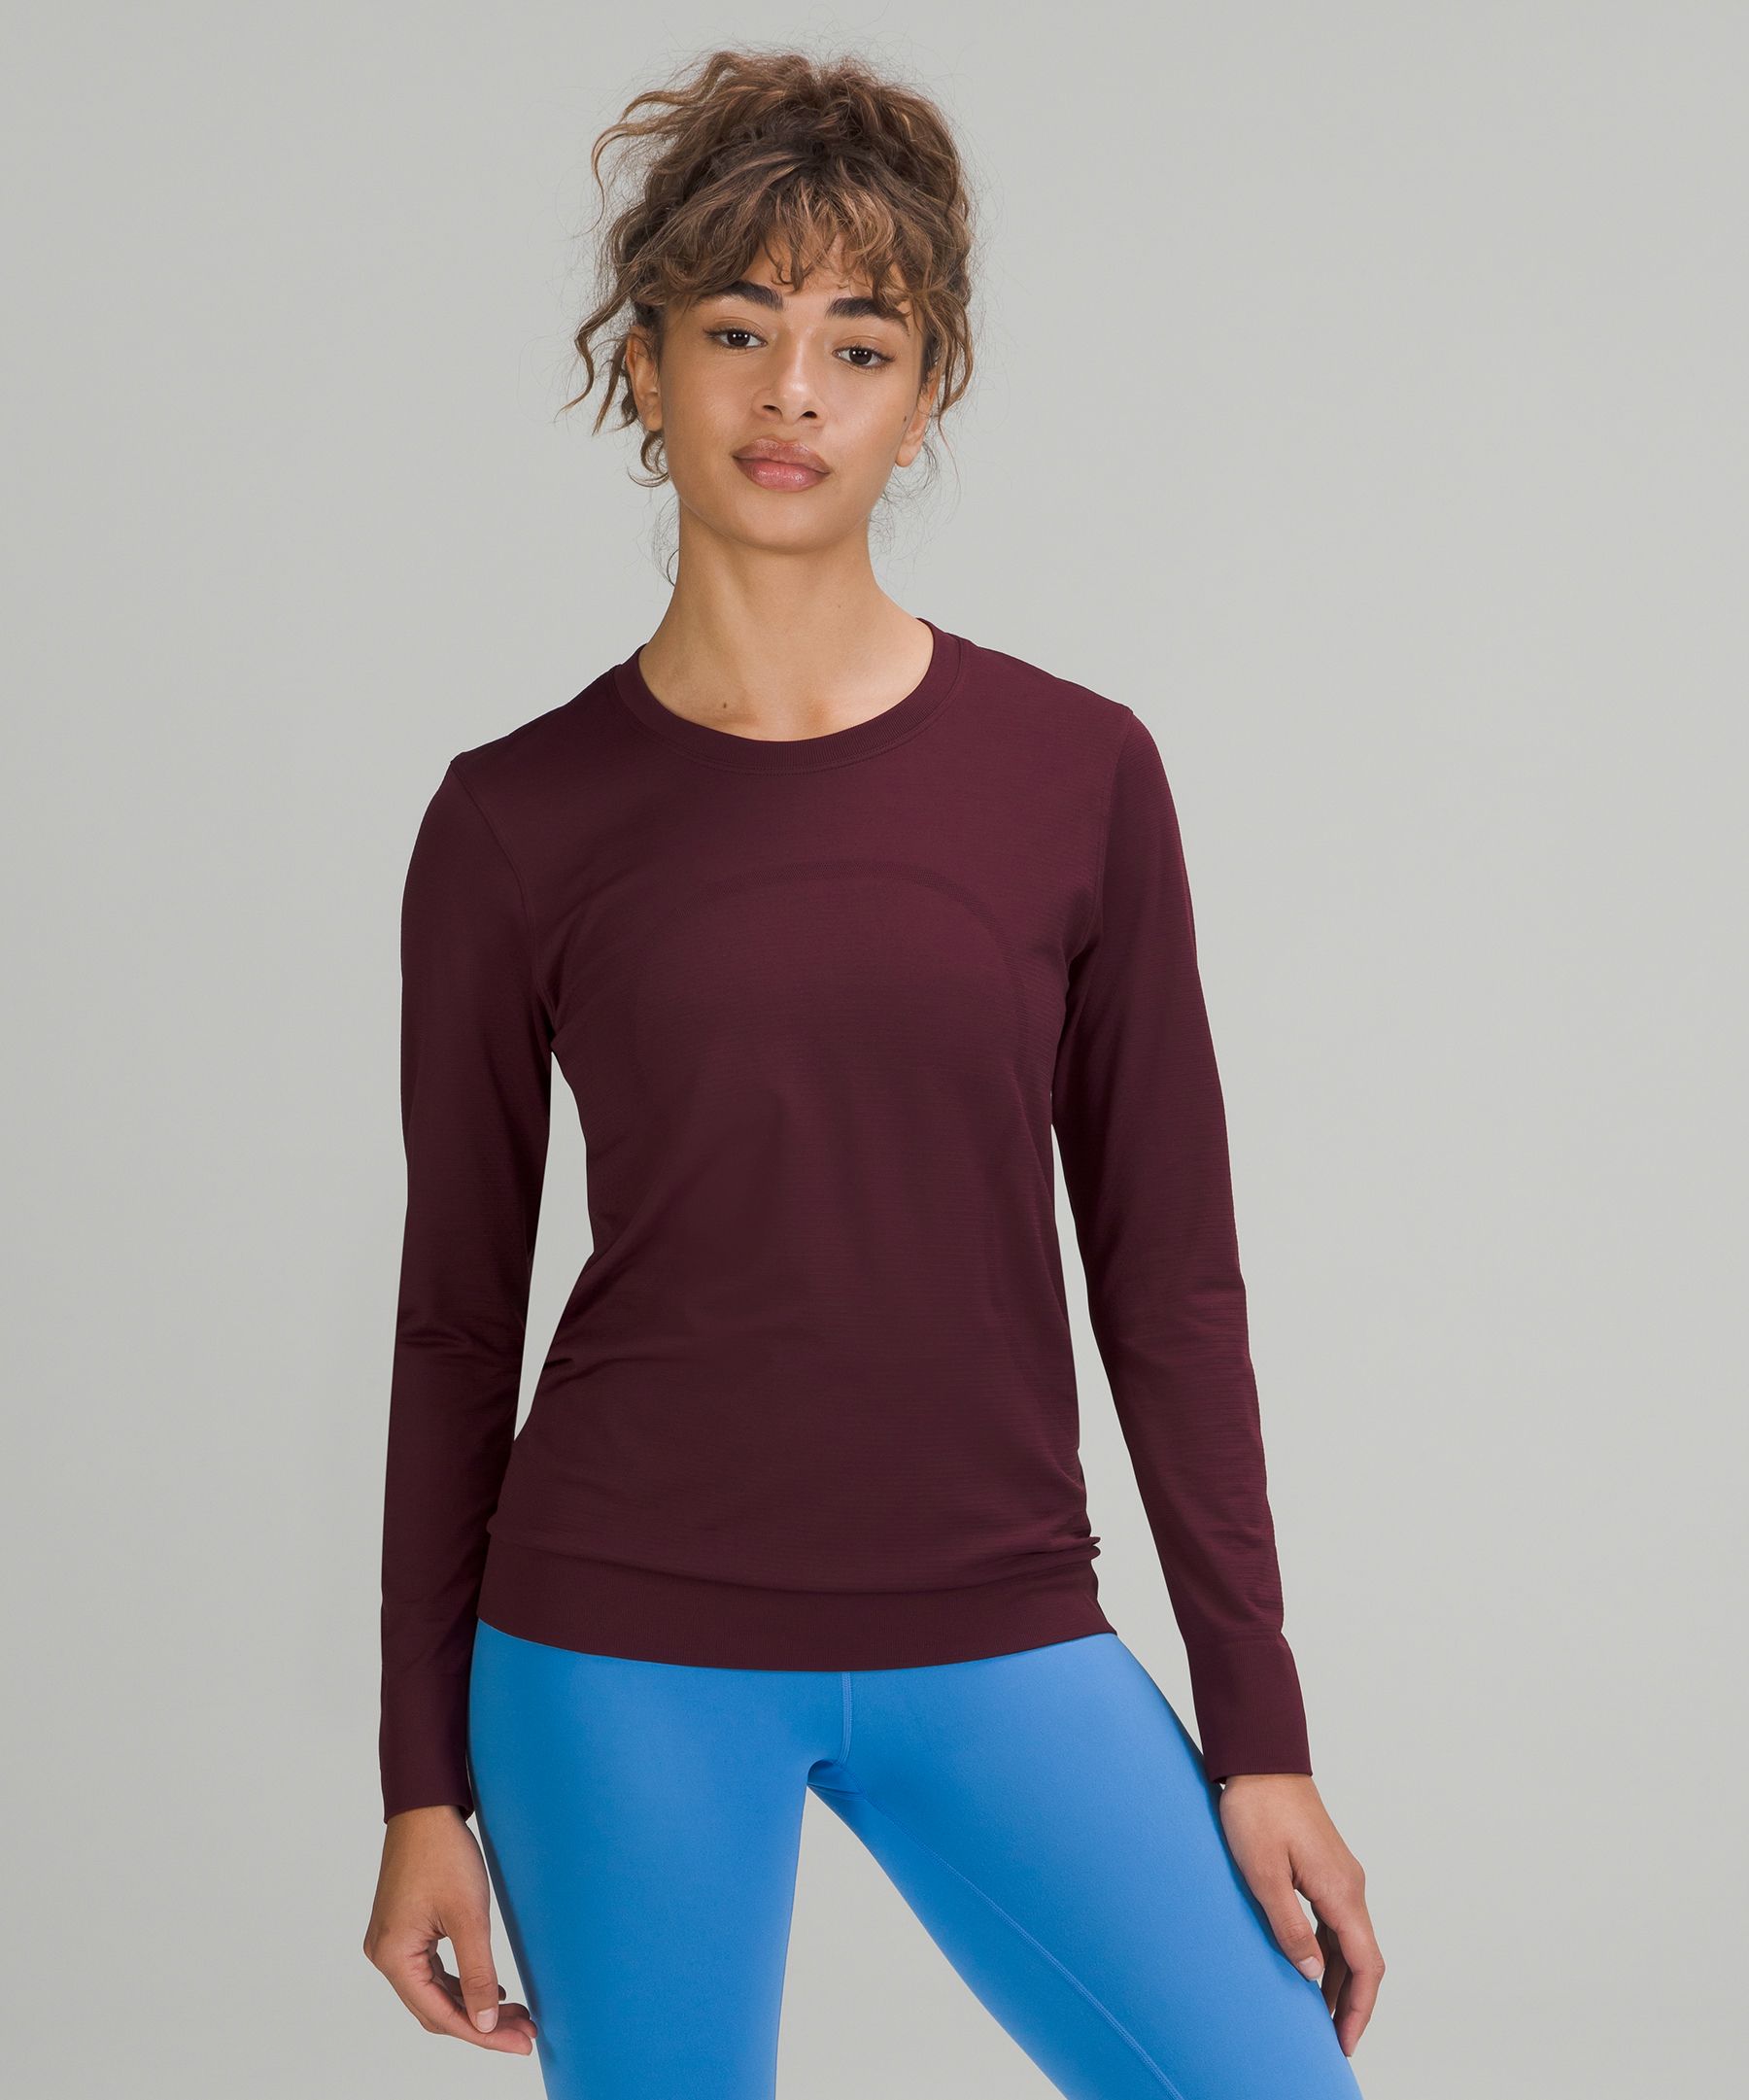 Lululemon Swiftly Relaxed Long Sleeve Shirt 2.0 In Cassis/cassis